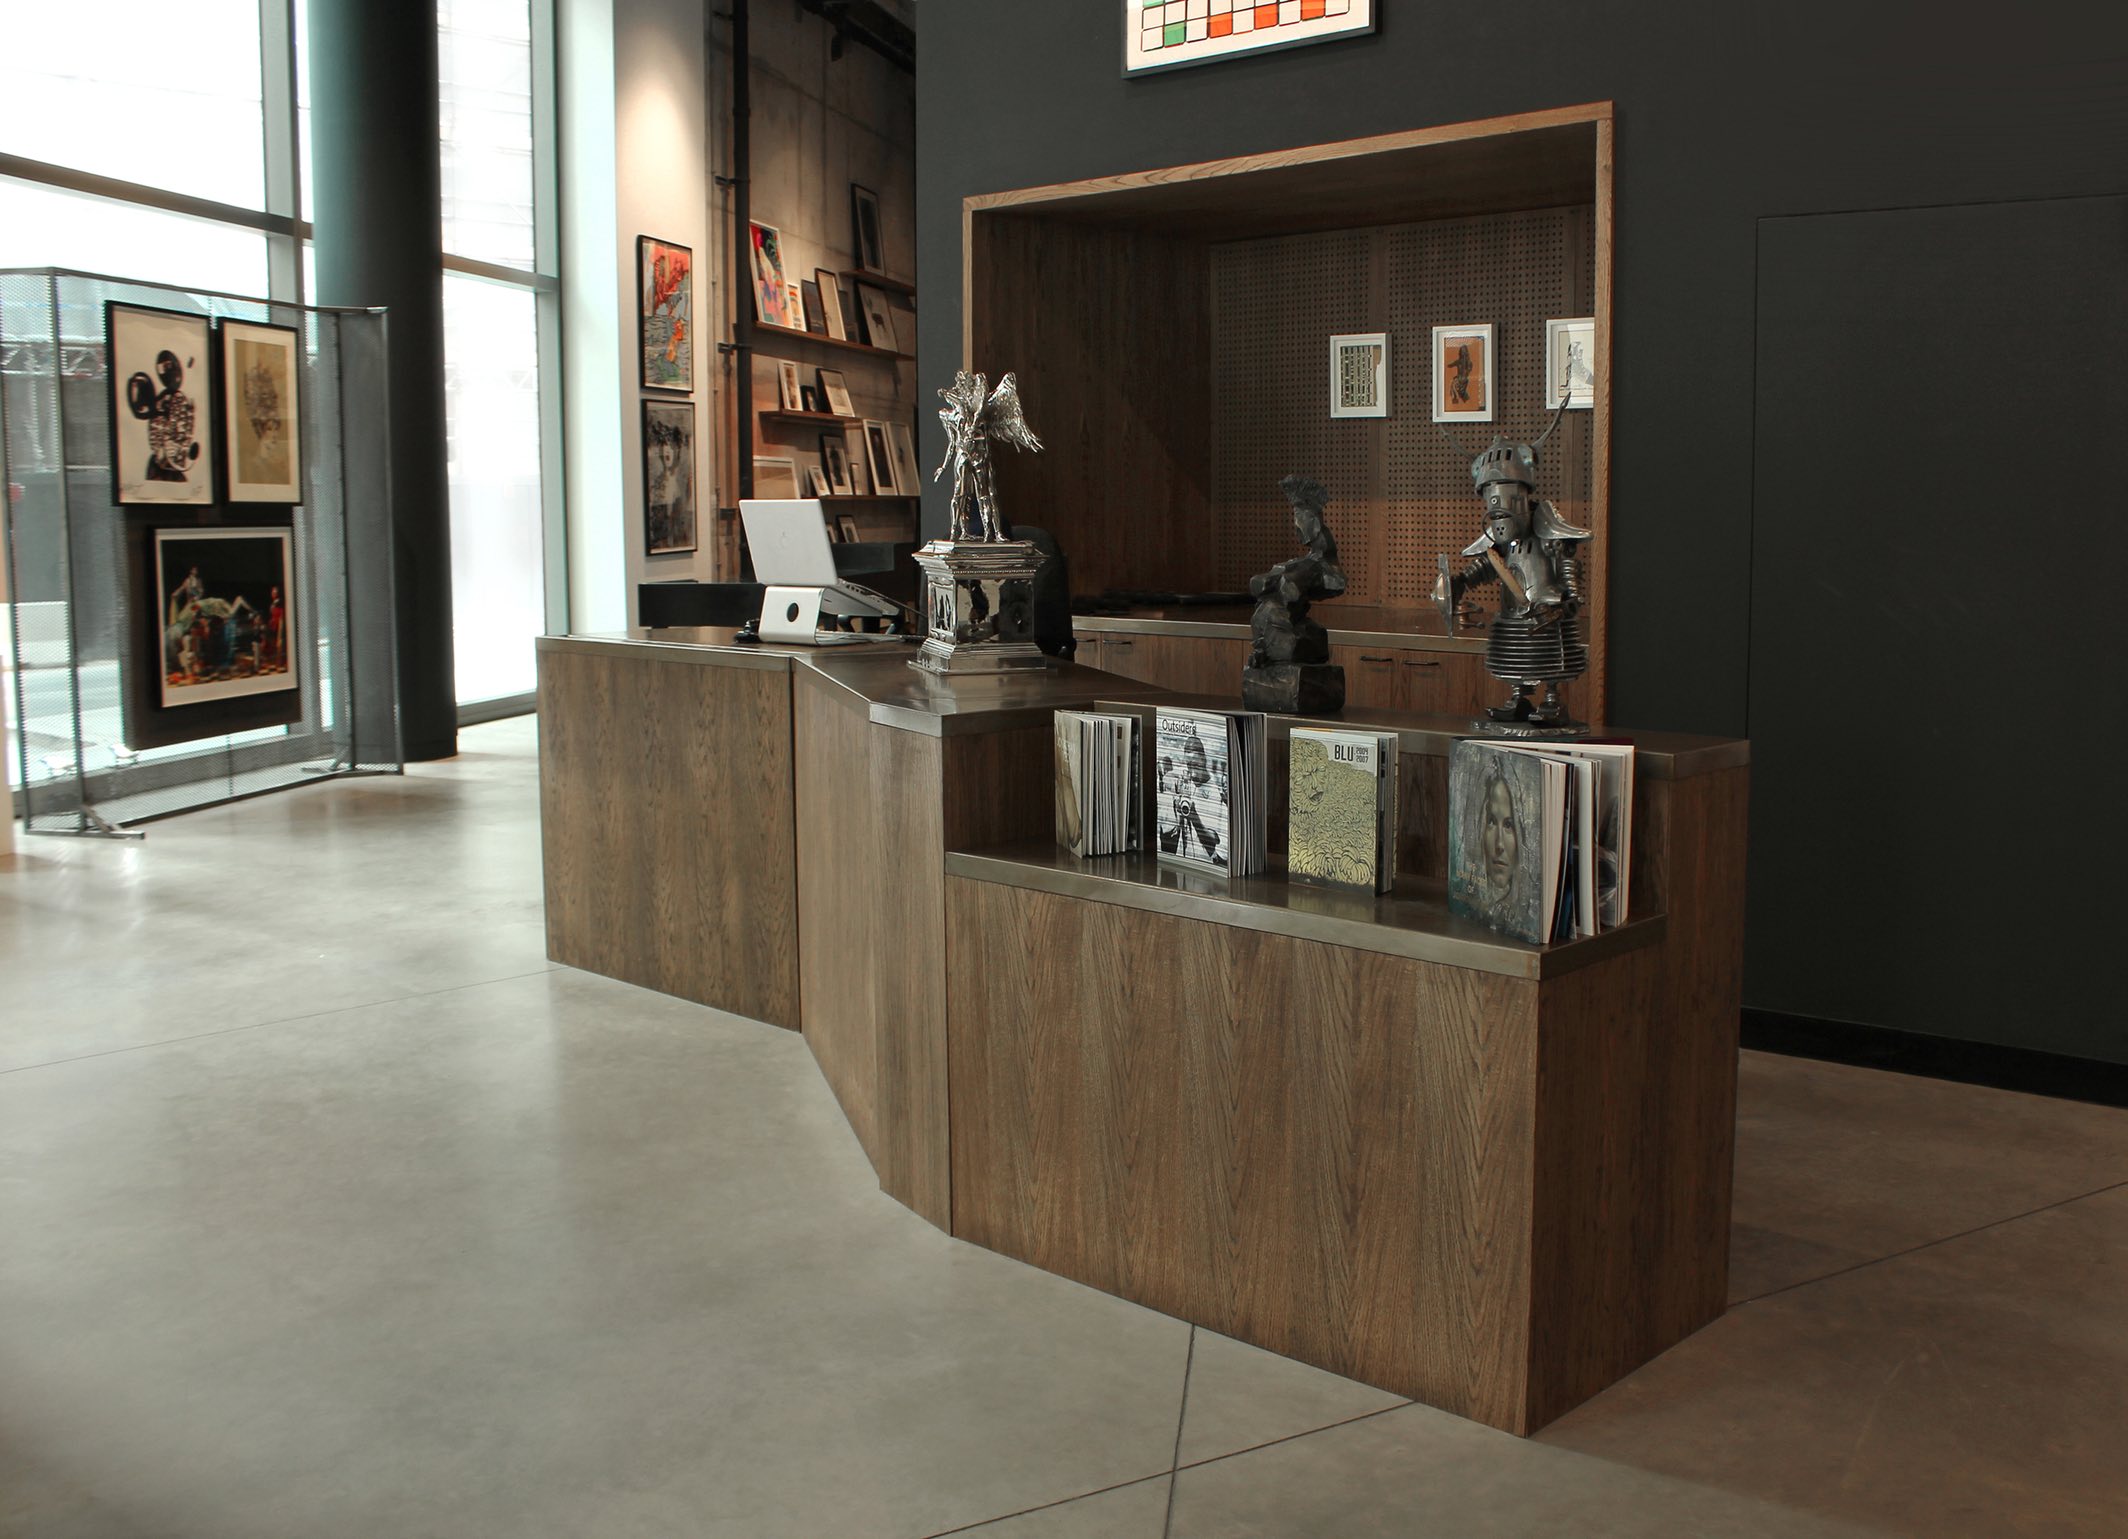 Execution Prints Gallery, London - Designed by ATELIERwest Ltd. 2